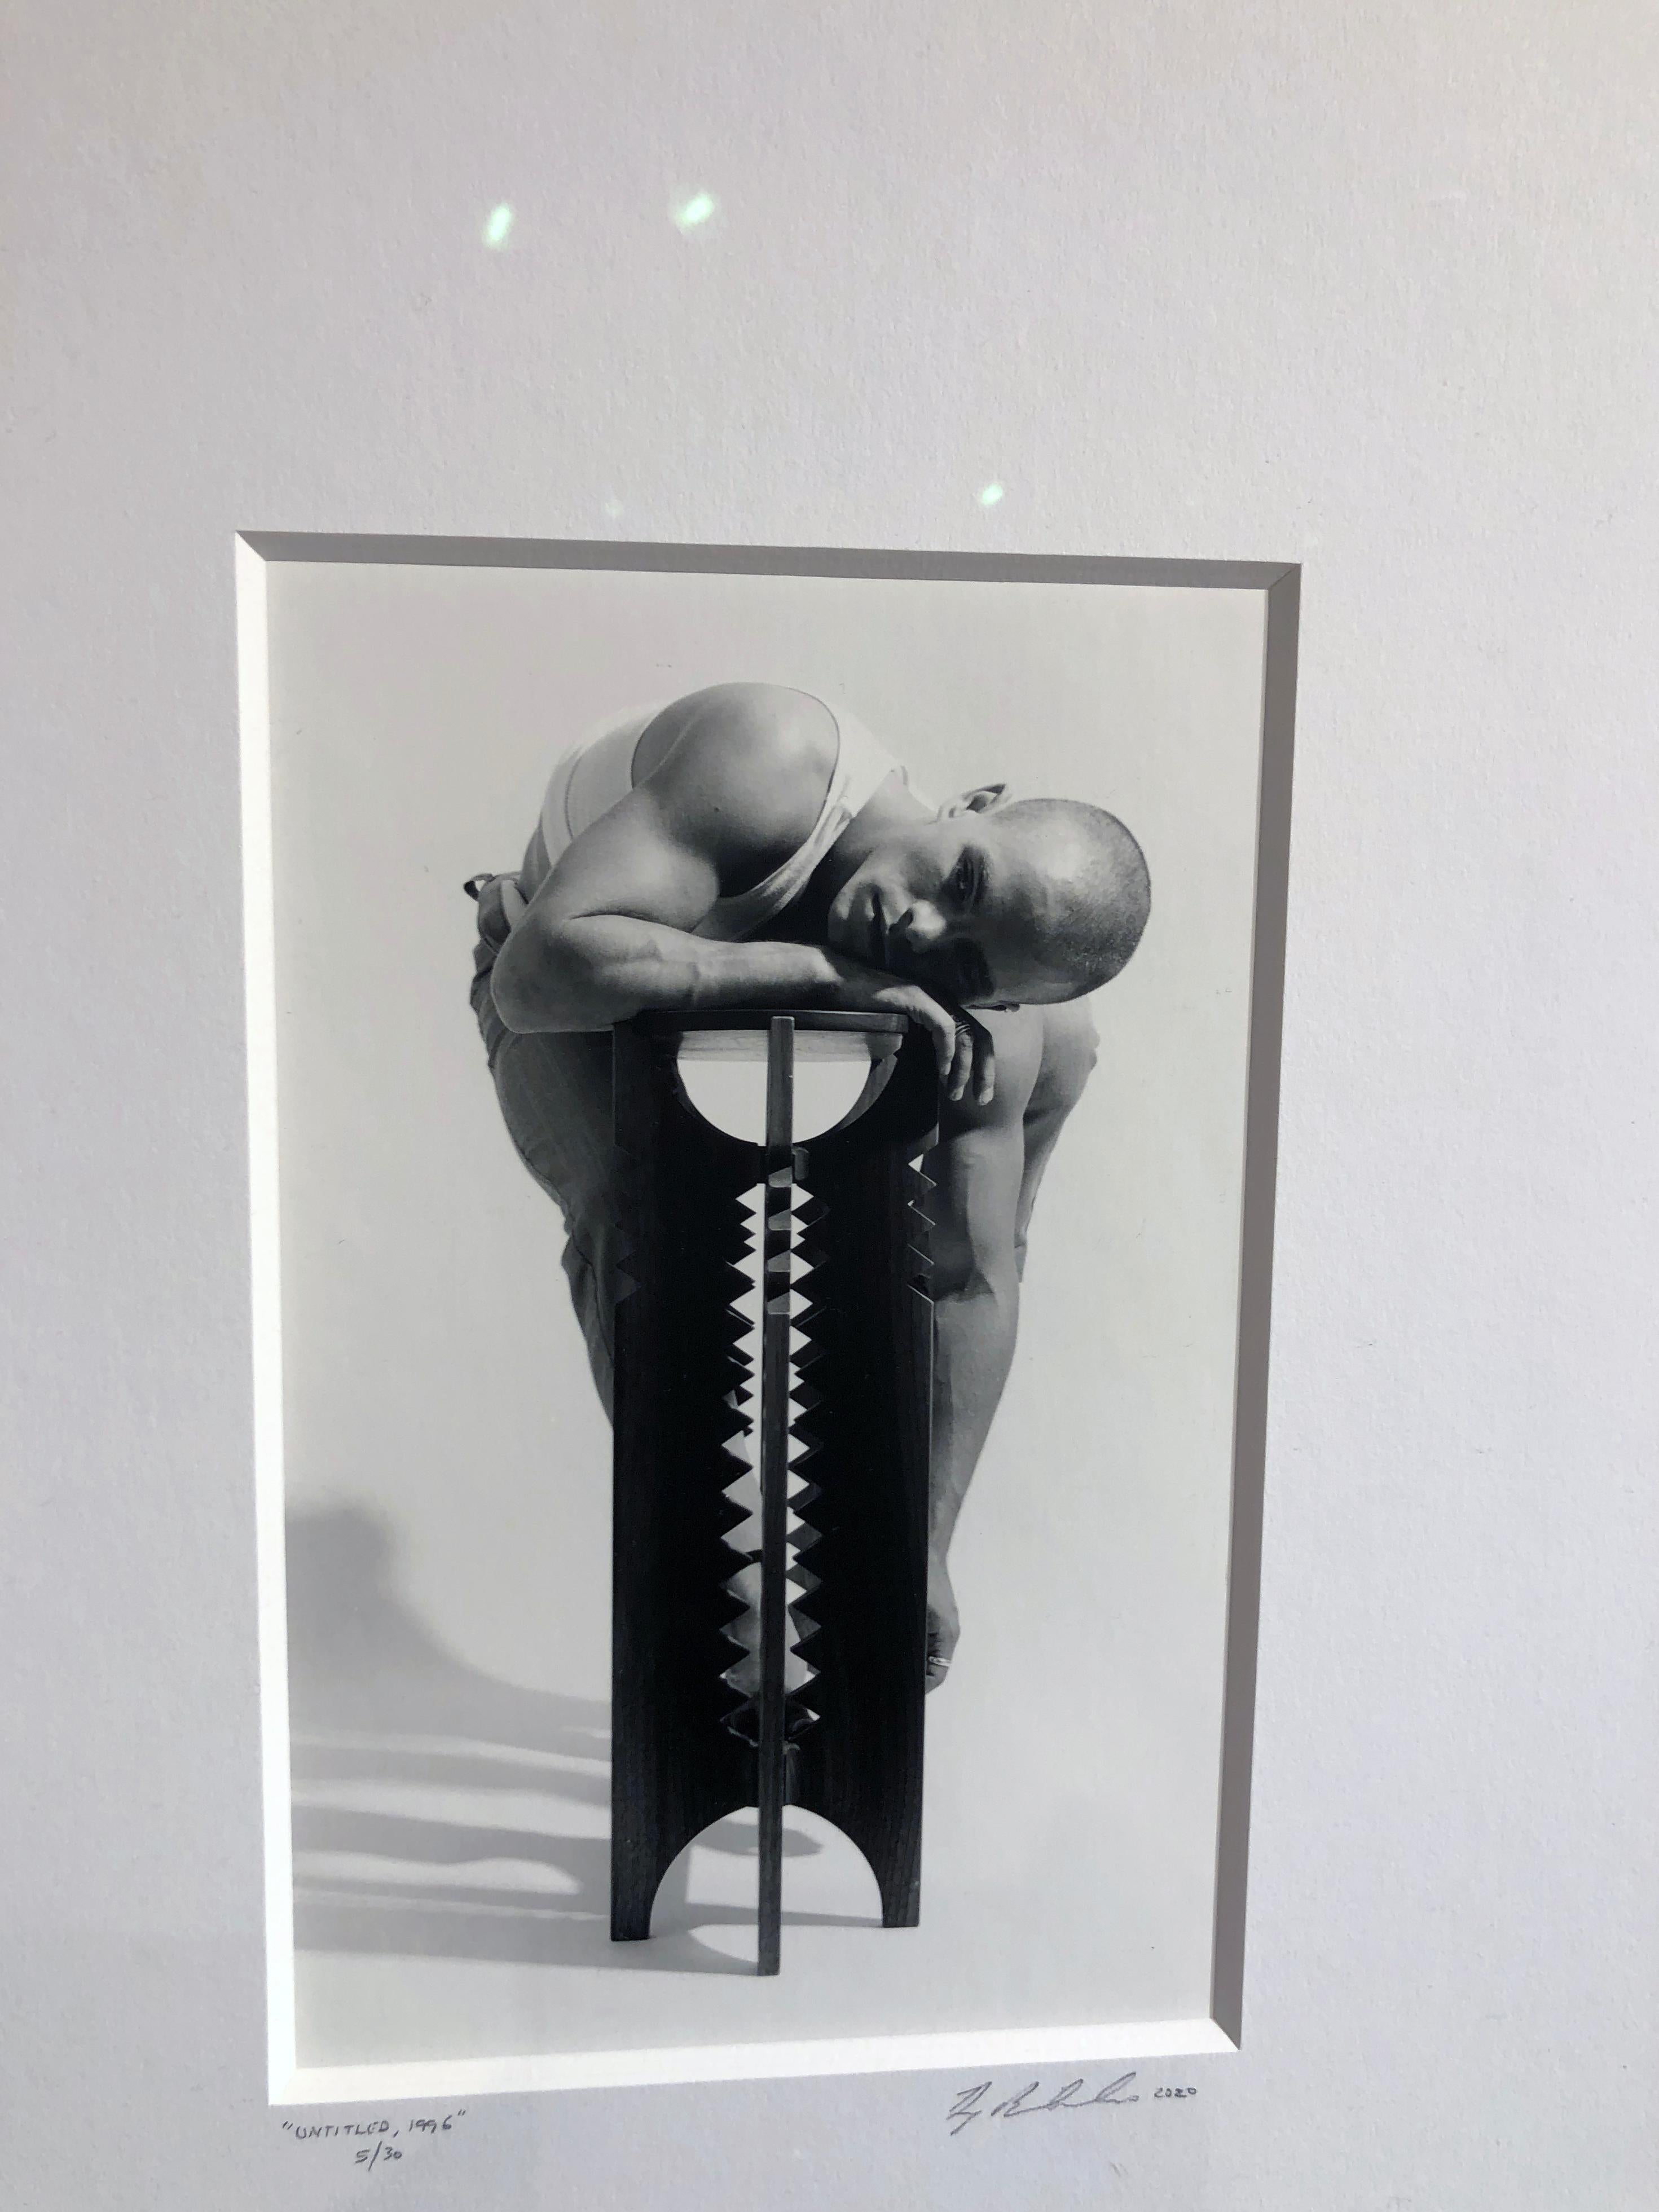 Male nude figure draped over contemporary architectural table.  .  The artist uses traditional photography methods shooting the image on film.  The image is printed using traditional darkroom techniques.  The artwork is tastefully framed and matted.